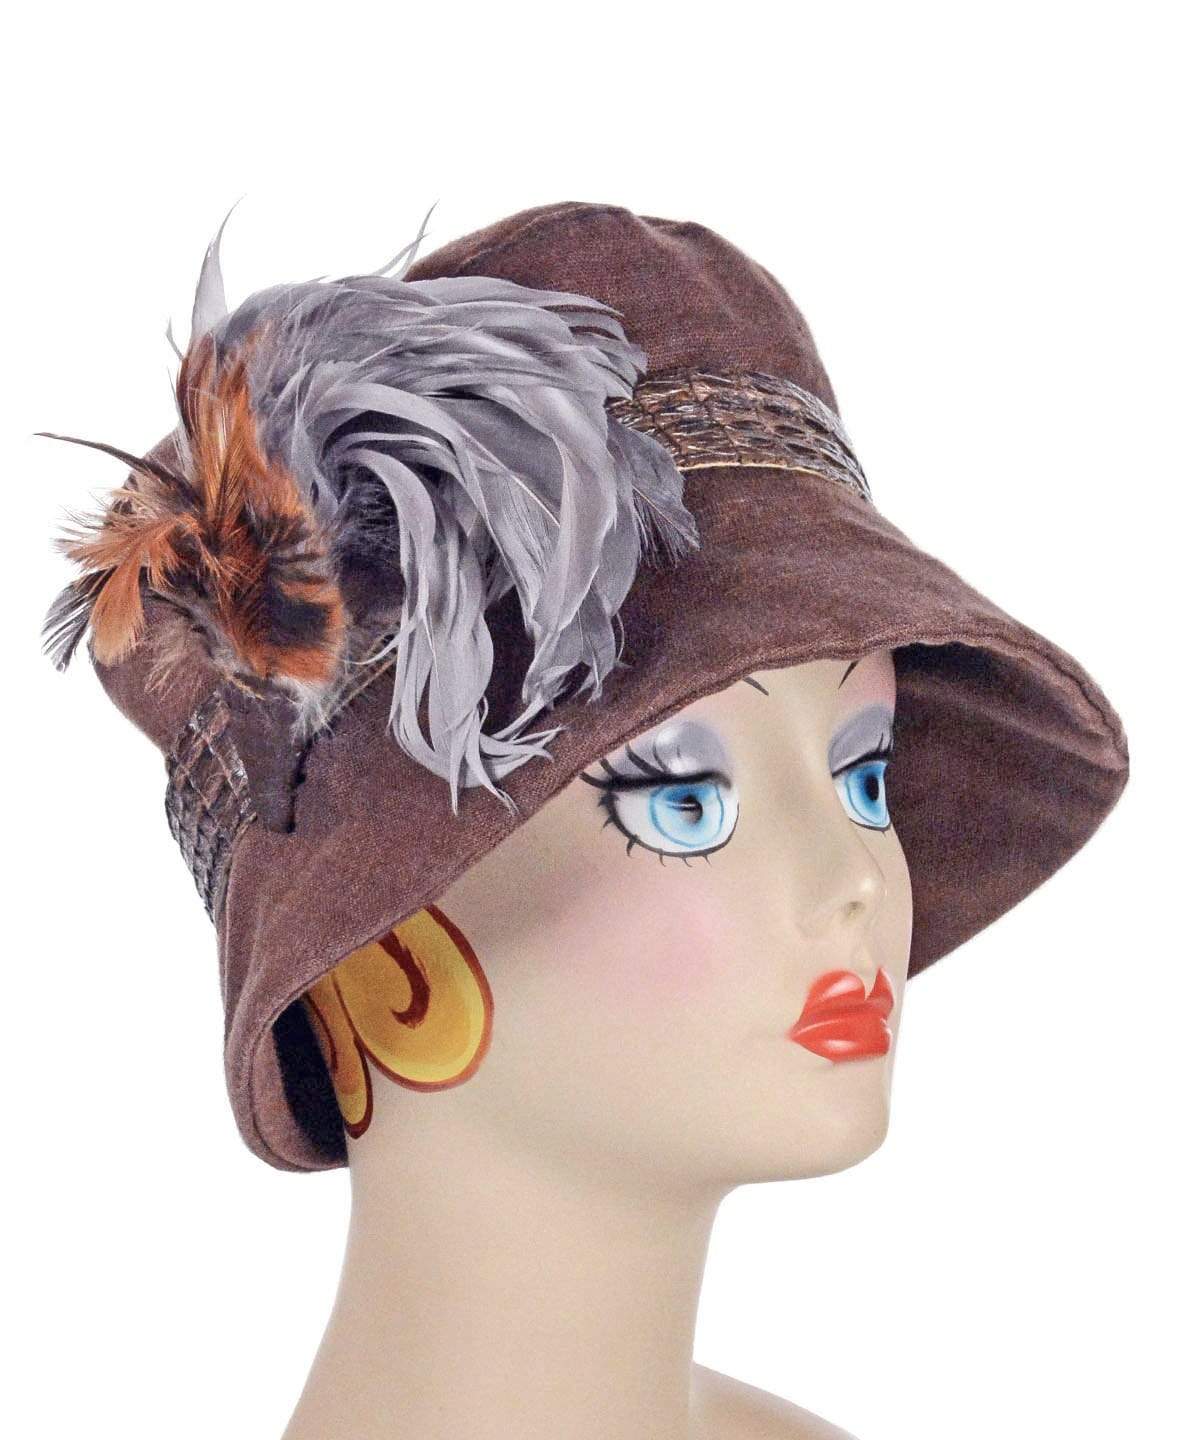 Molly Bucket Style Hat in Chocolate Linen with Faux Croc Band featuring a Silver Rooster Feather Brooch | Handmade By Pandemonium Millinery in Seattle WA